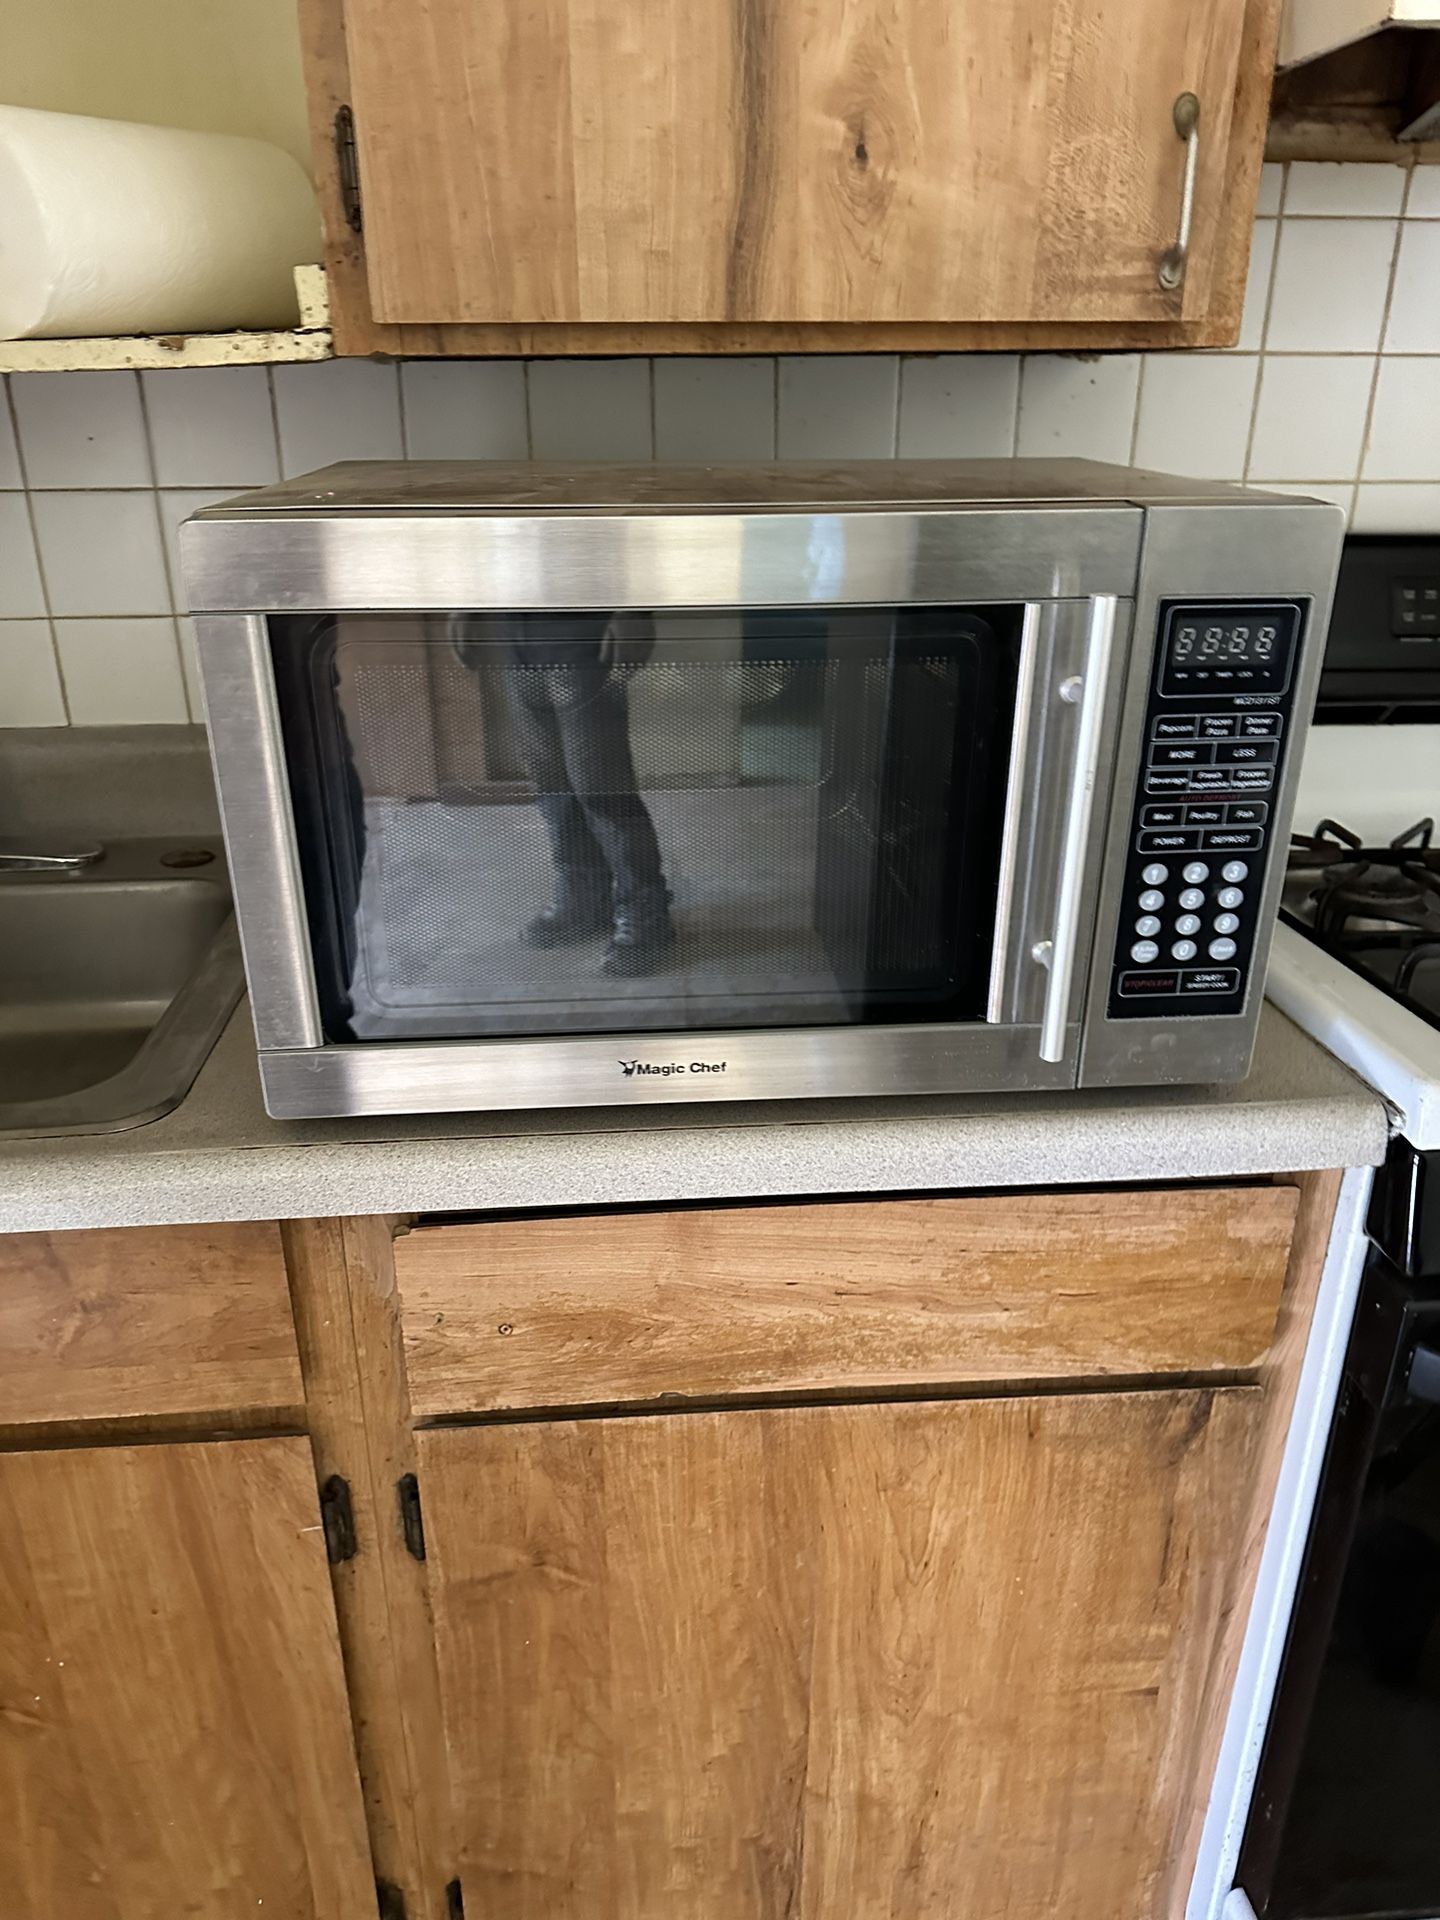 FREE Magic Chef Microwave *IF THE POST IS UP, THAT MEANS ITS’S AVAILABLE*